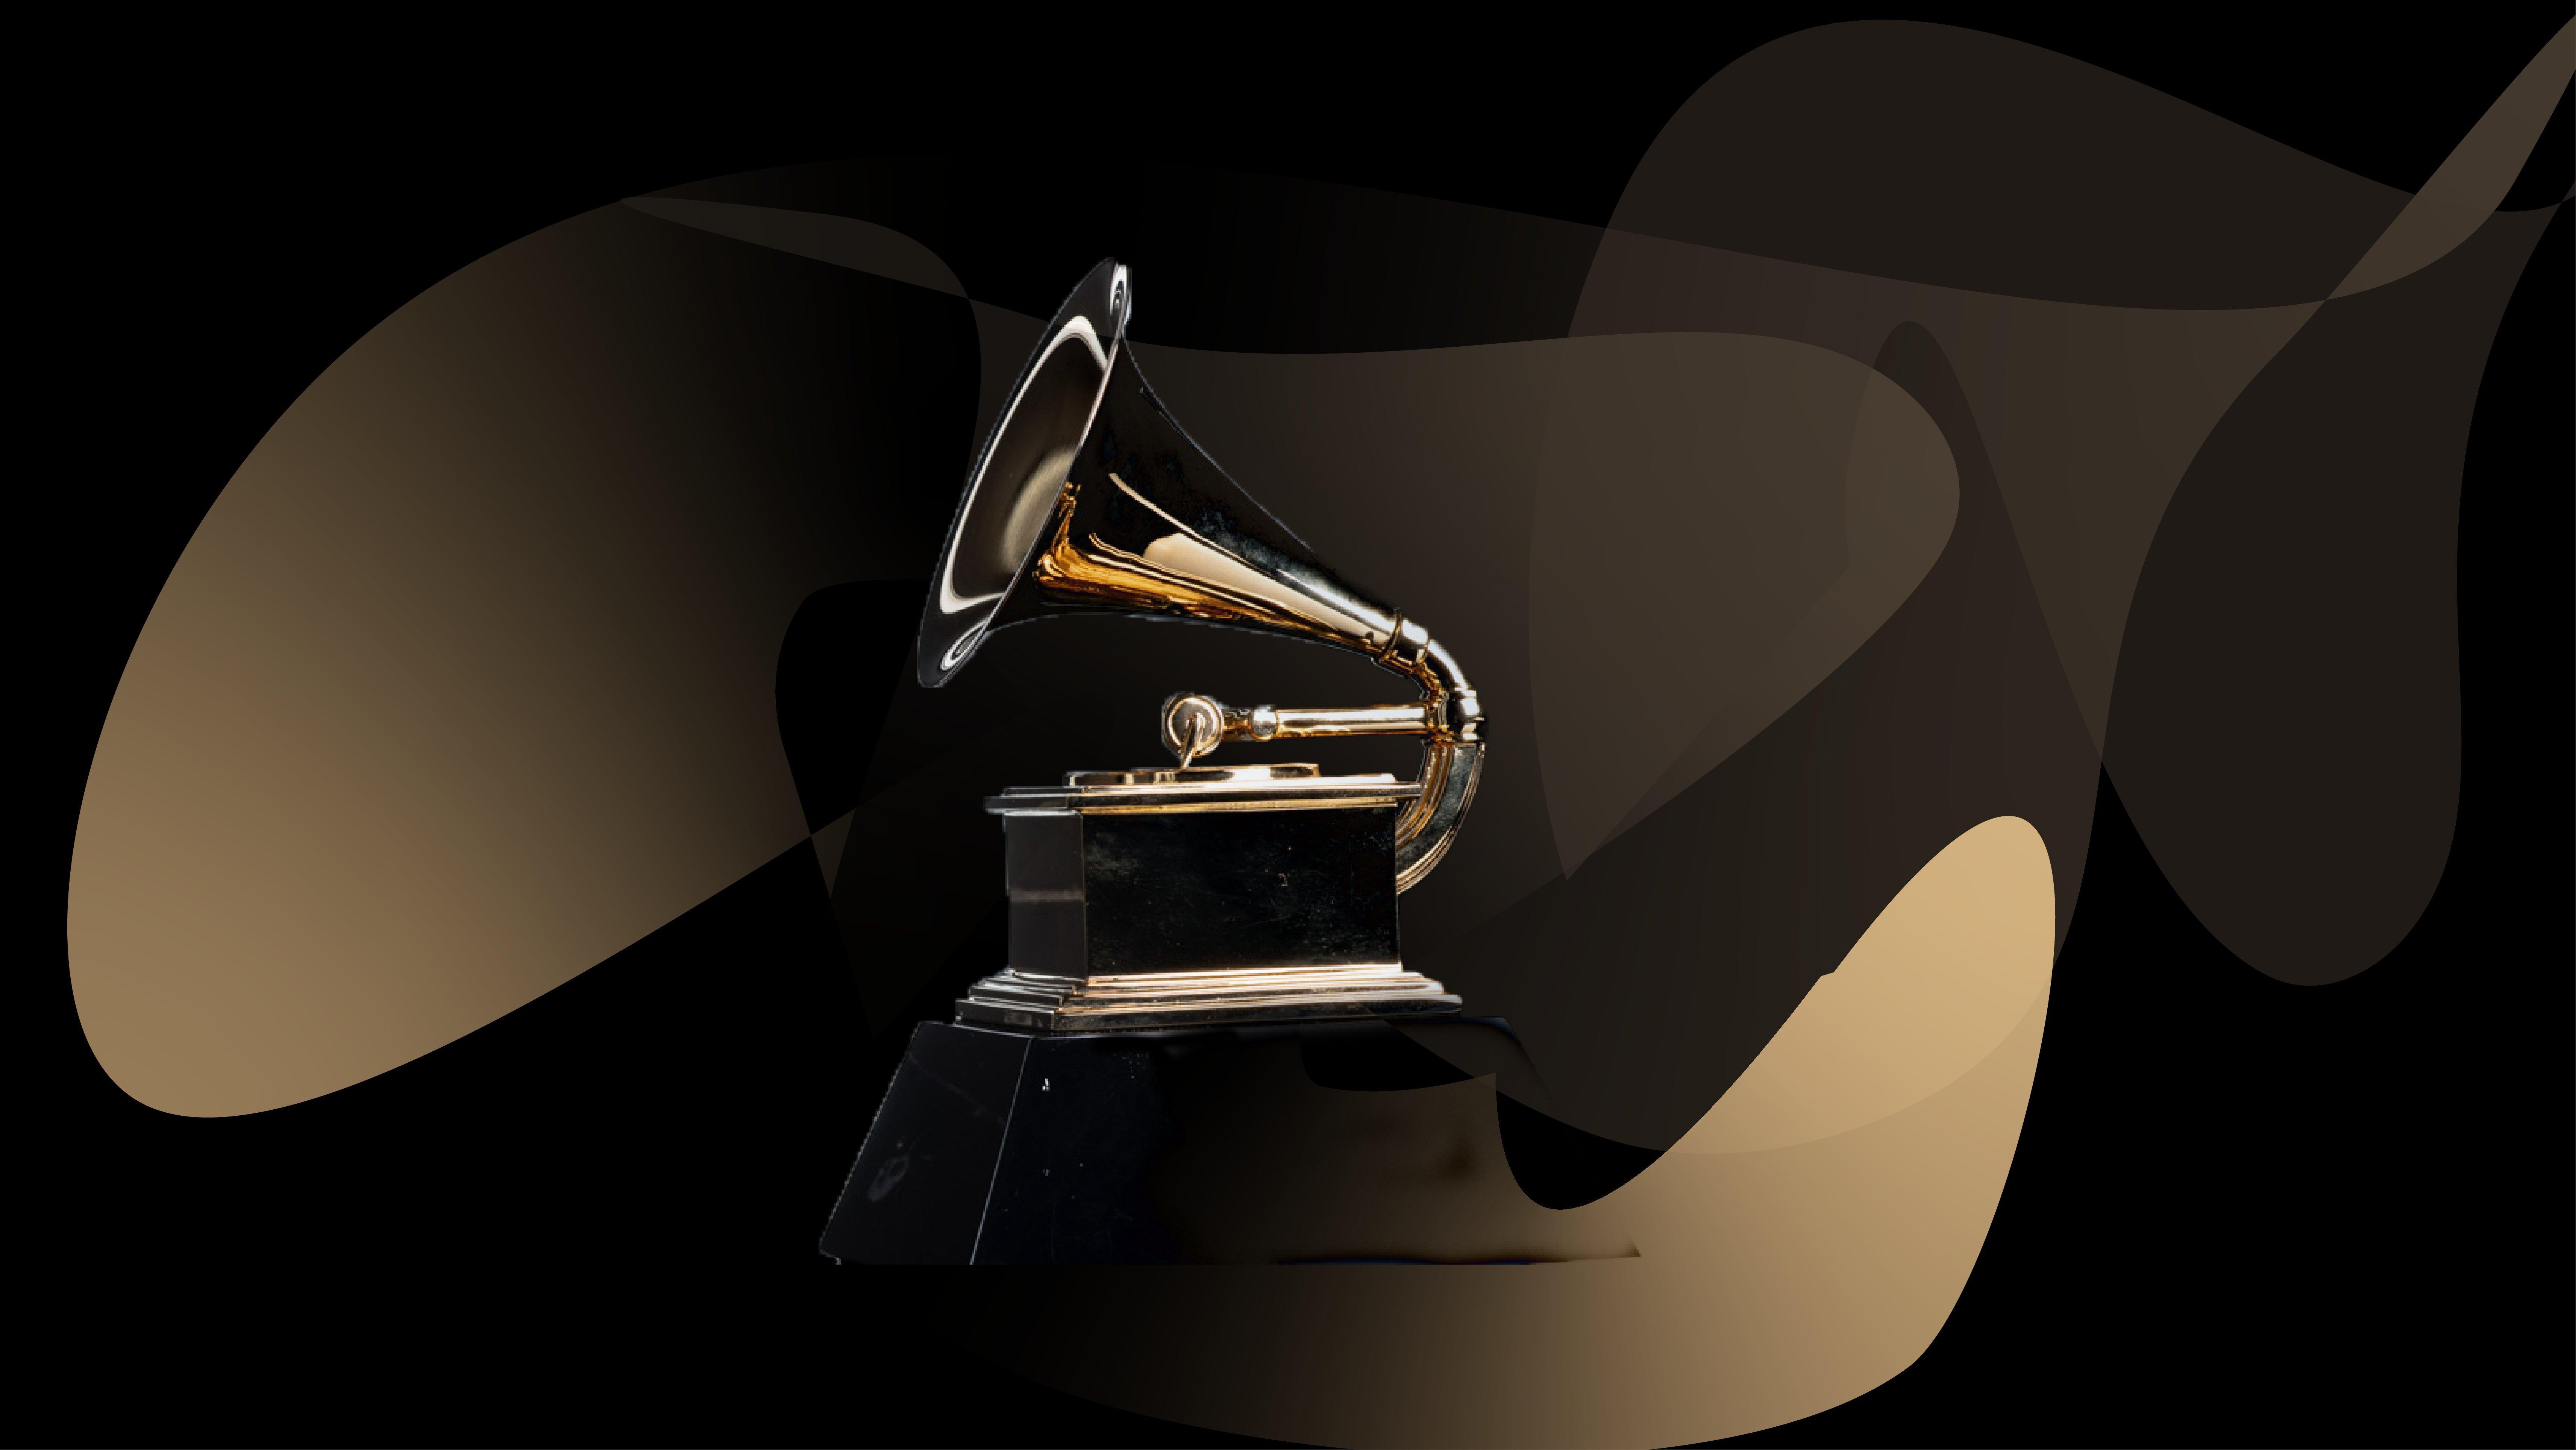 New Categories For The 2023 GRAMMYs Announced: Songwriter Of The